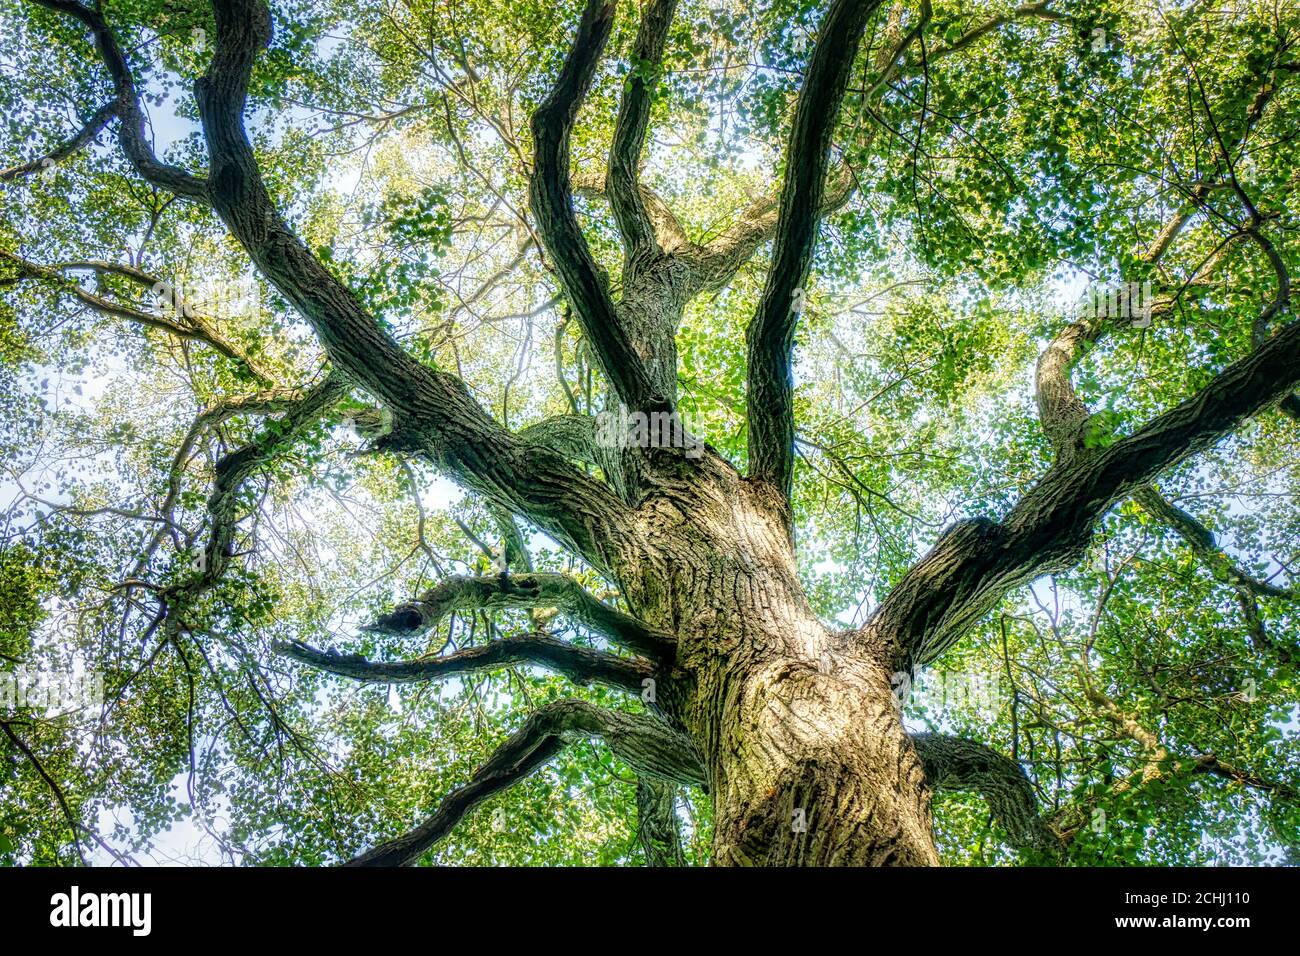 The Trunk of Old Linden Tree. Lower Angle of Linden Tree Foliage in Sunlight Stock Photo